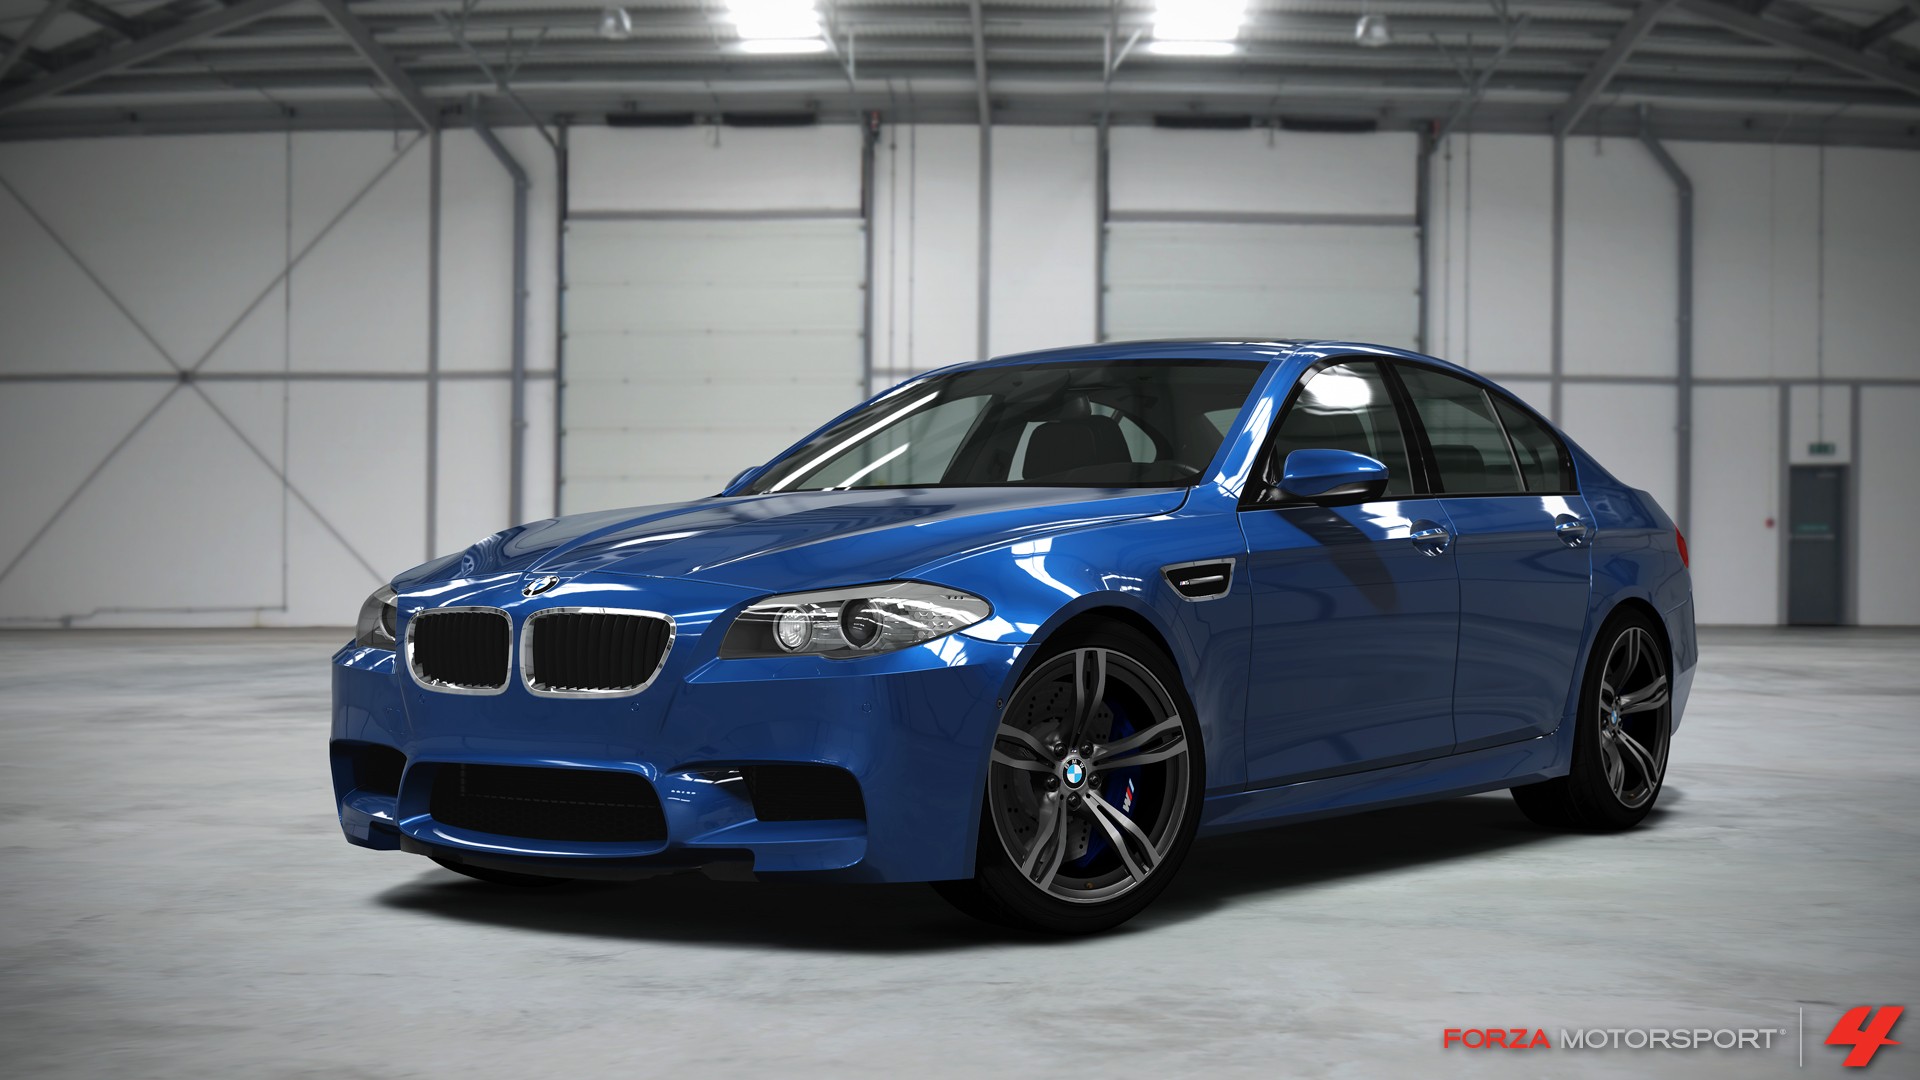 Bmw M5 Forza Motorsport Xbox Cars Video Games Wallpaper Holy